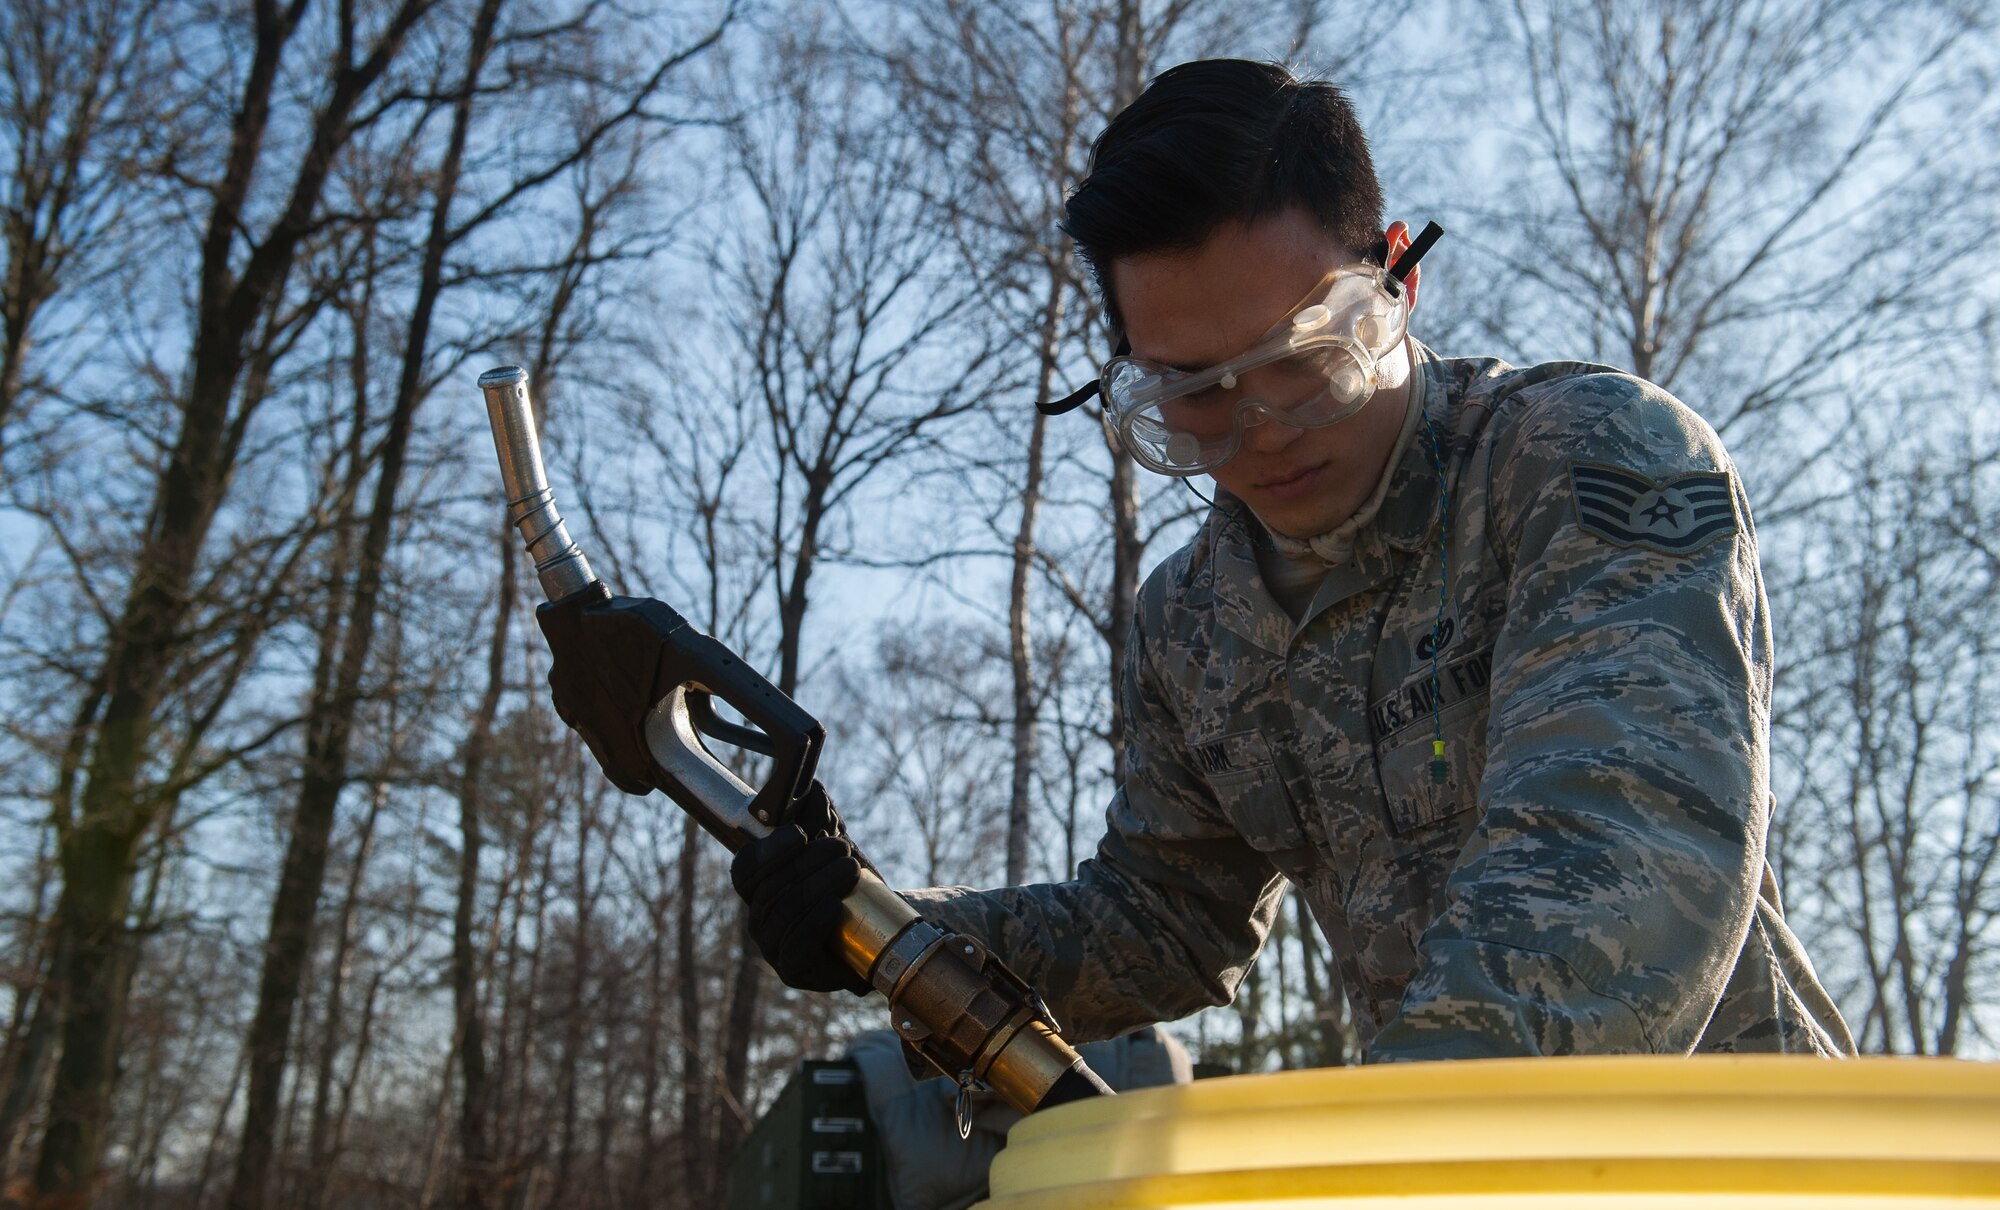 Staff Sgt. Ju Ho Park, 1st Combat Communications Squadron electrical power production craftsman, pumps fuel from a barrel into a power generator during a training exercise on Ramstein Air Base, Germany, Feb. 16, 2017. The 1 CBCS is part of the 435th Air and Space Communications Group, which provides its major command’s only combat communications support for all of the North Atlantic Treaty Organization. (U.S. Air Force photo by Senior Airman Lane T. Plummer)